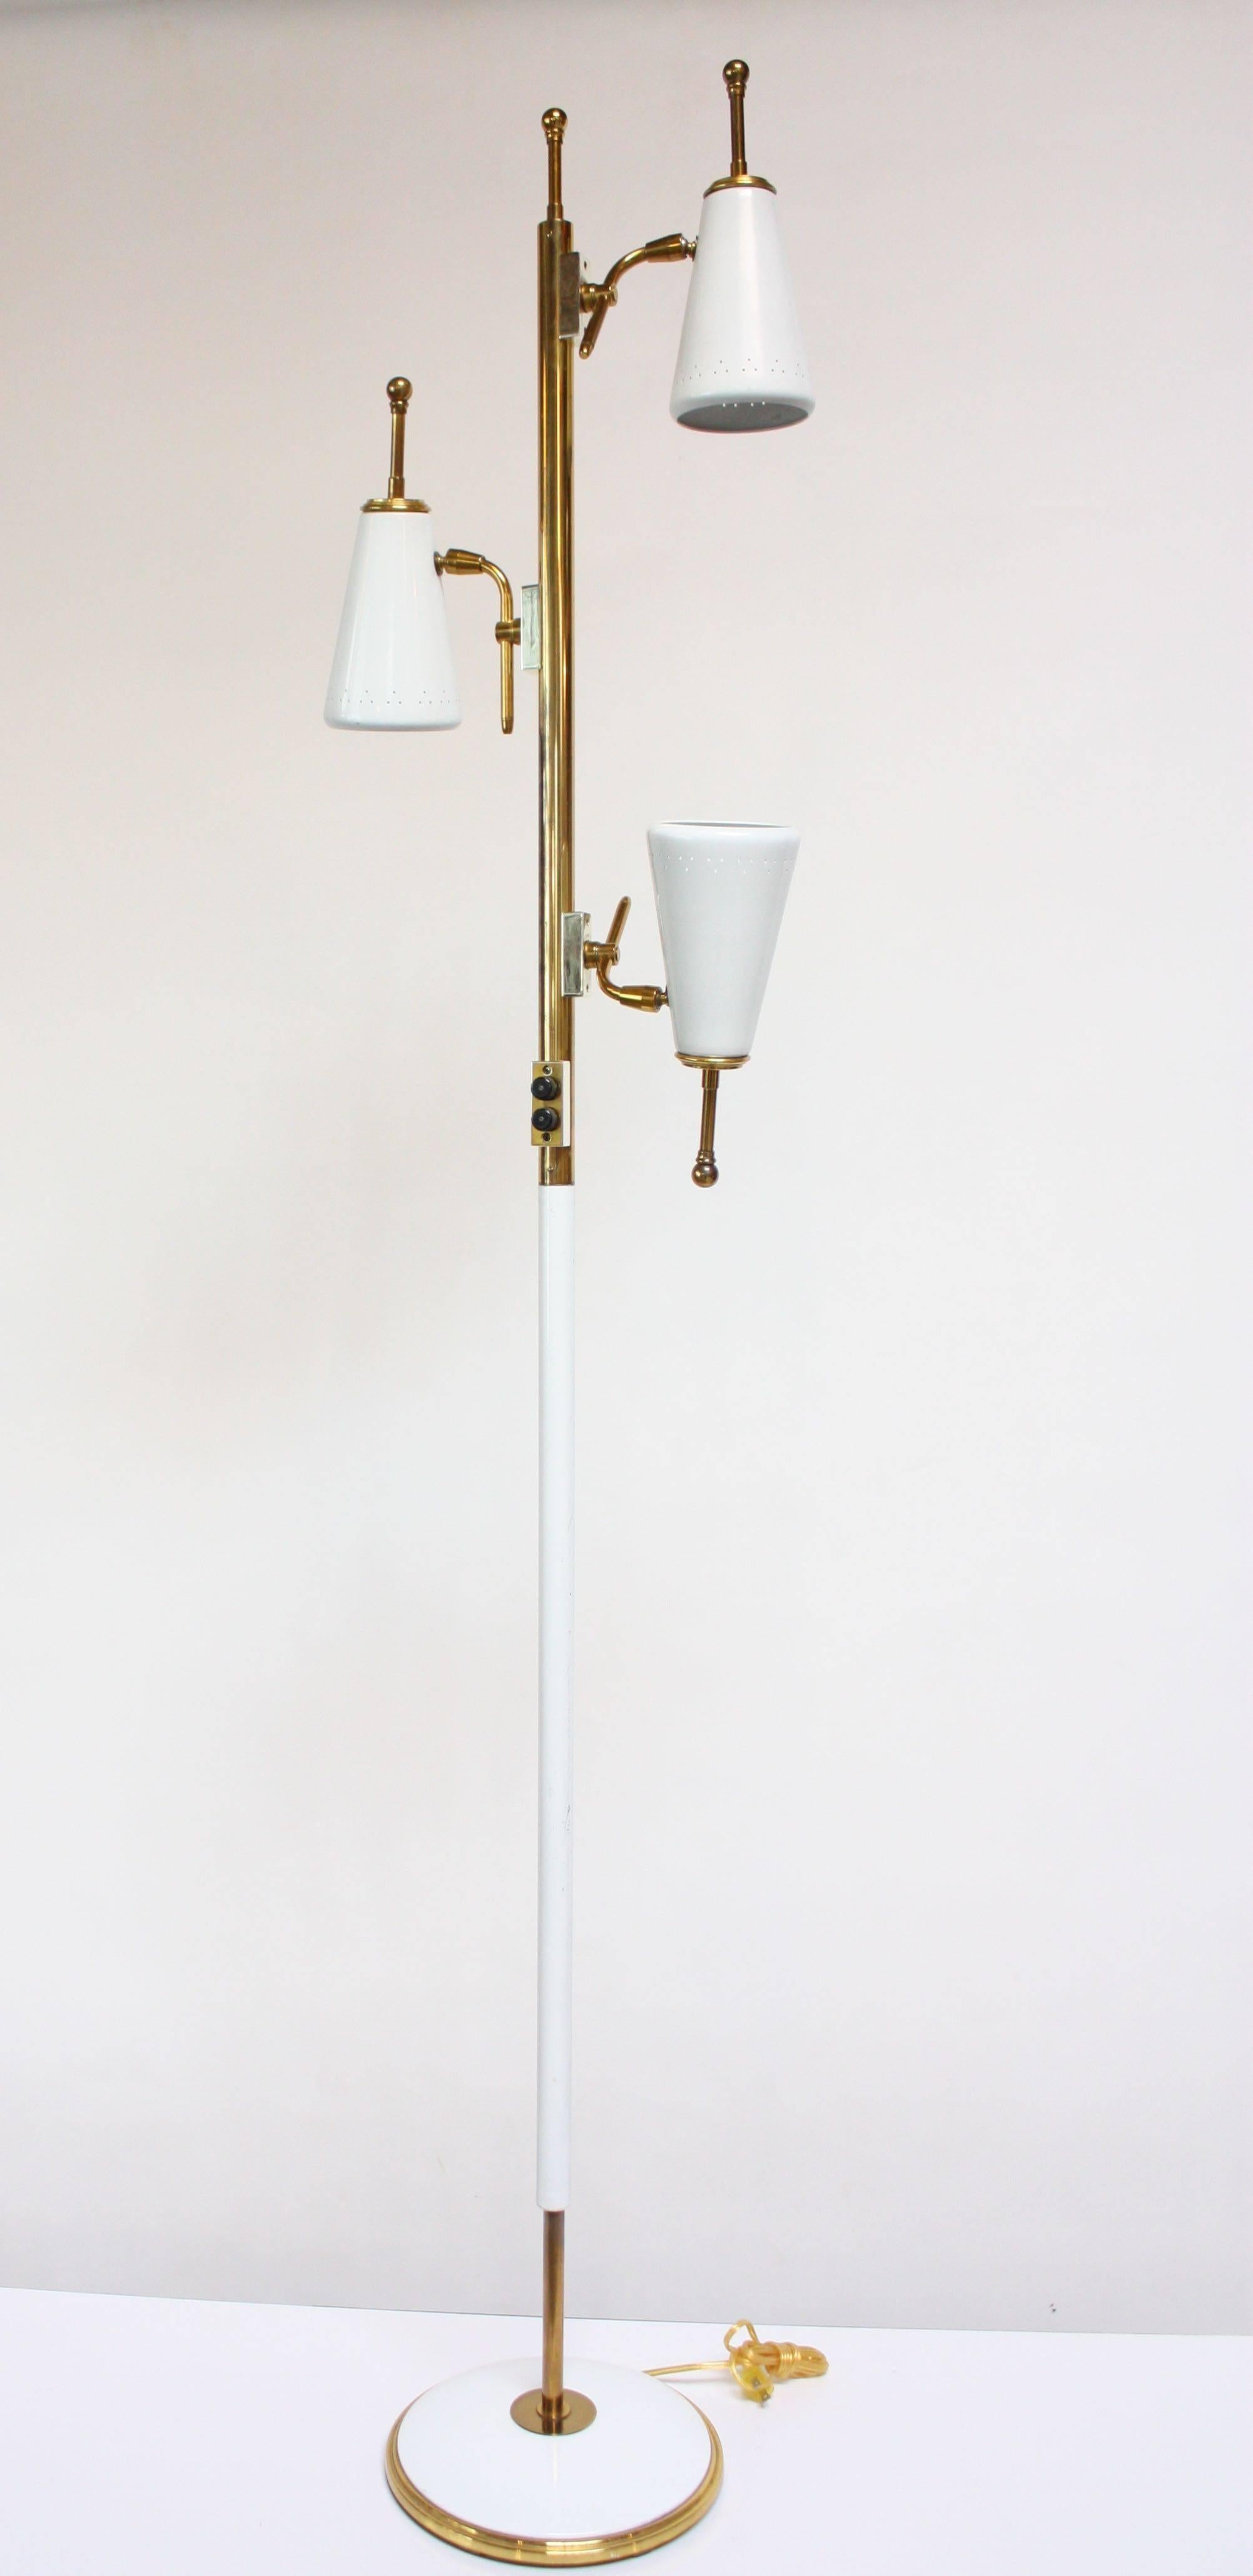 1950s Stiffel three-fixture adjustable floor lamp composed of a brass and painted metal tubular stem and three painted / perforated metal shades on a round base. Three illumination settings. Shades are fully adjustable; height is not.
Excellent,